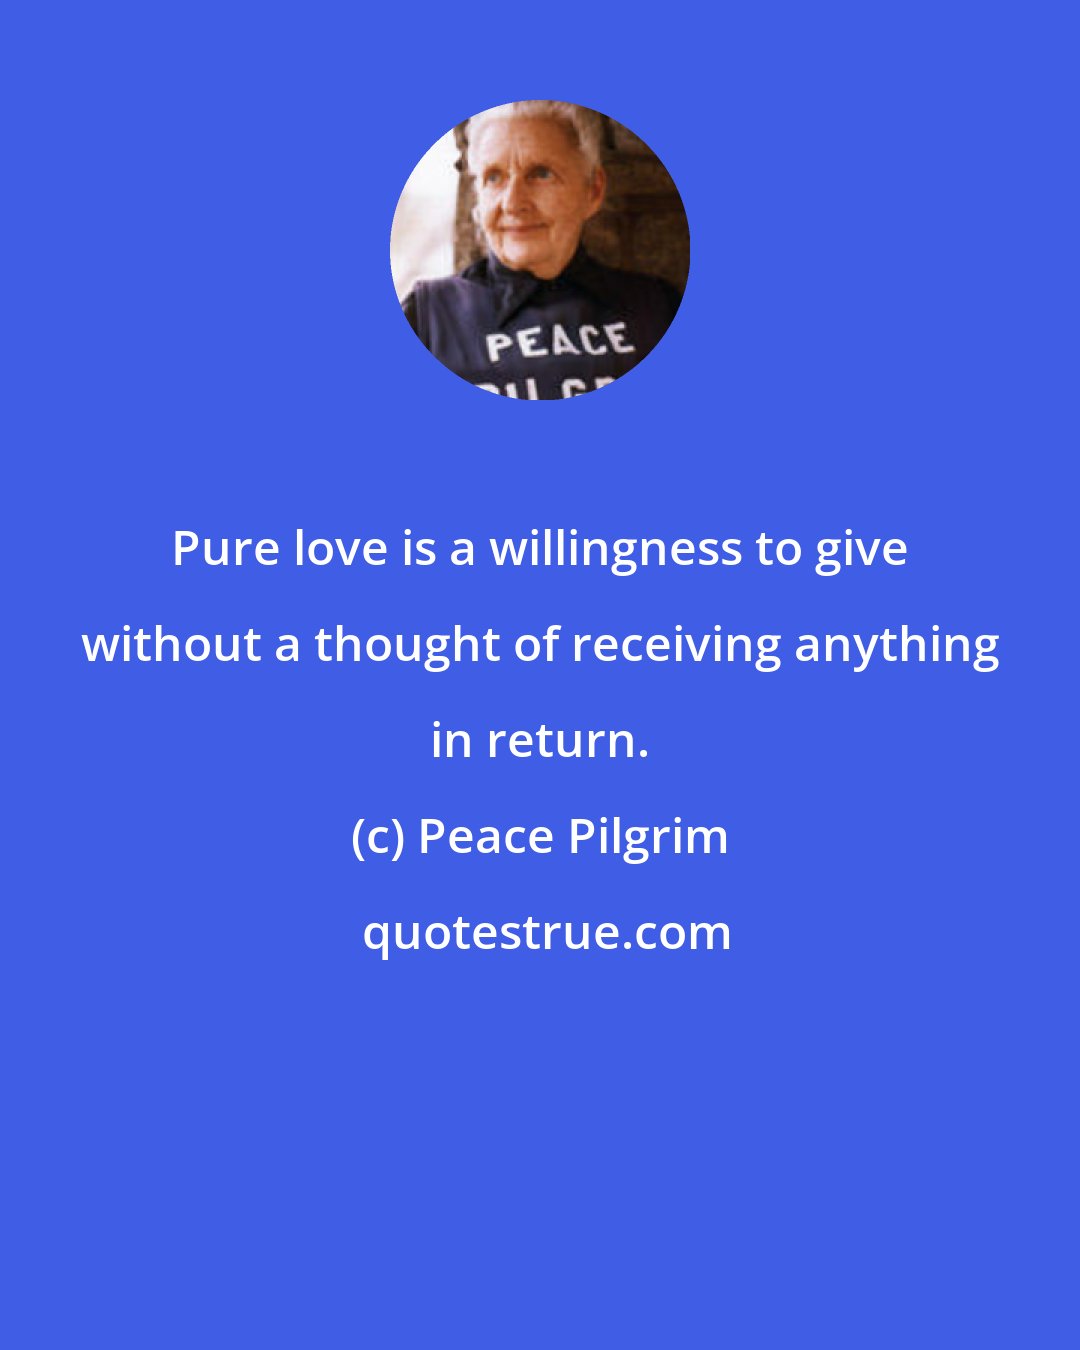 Peace Pilgrim: Pure love is a willingness to give without a thought of receiving anything in return.